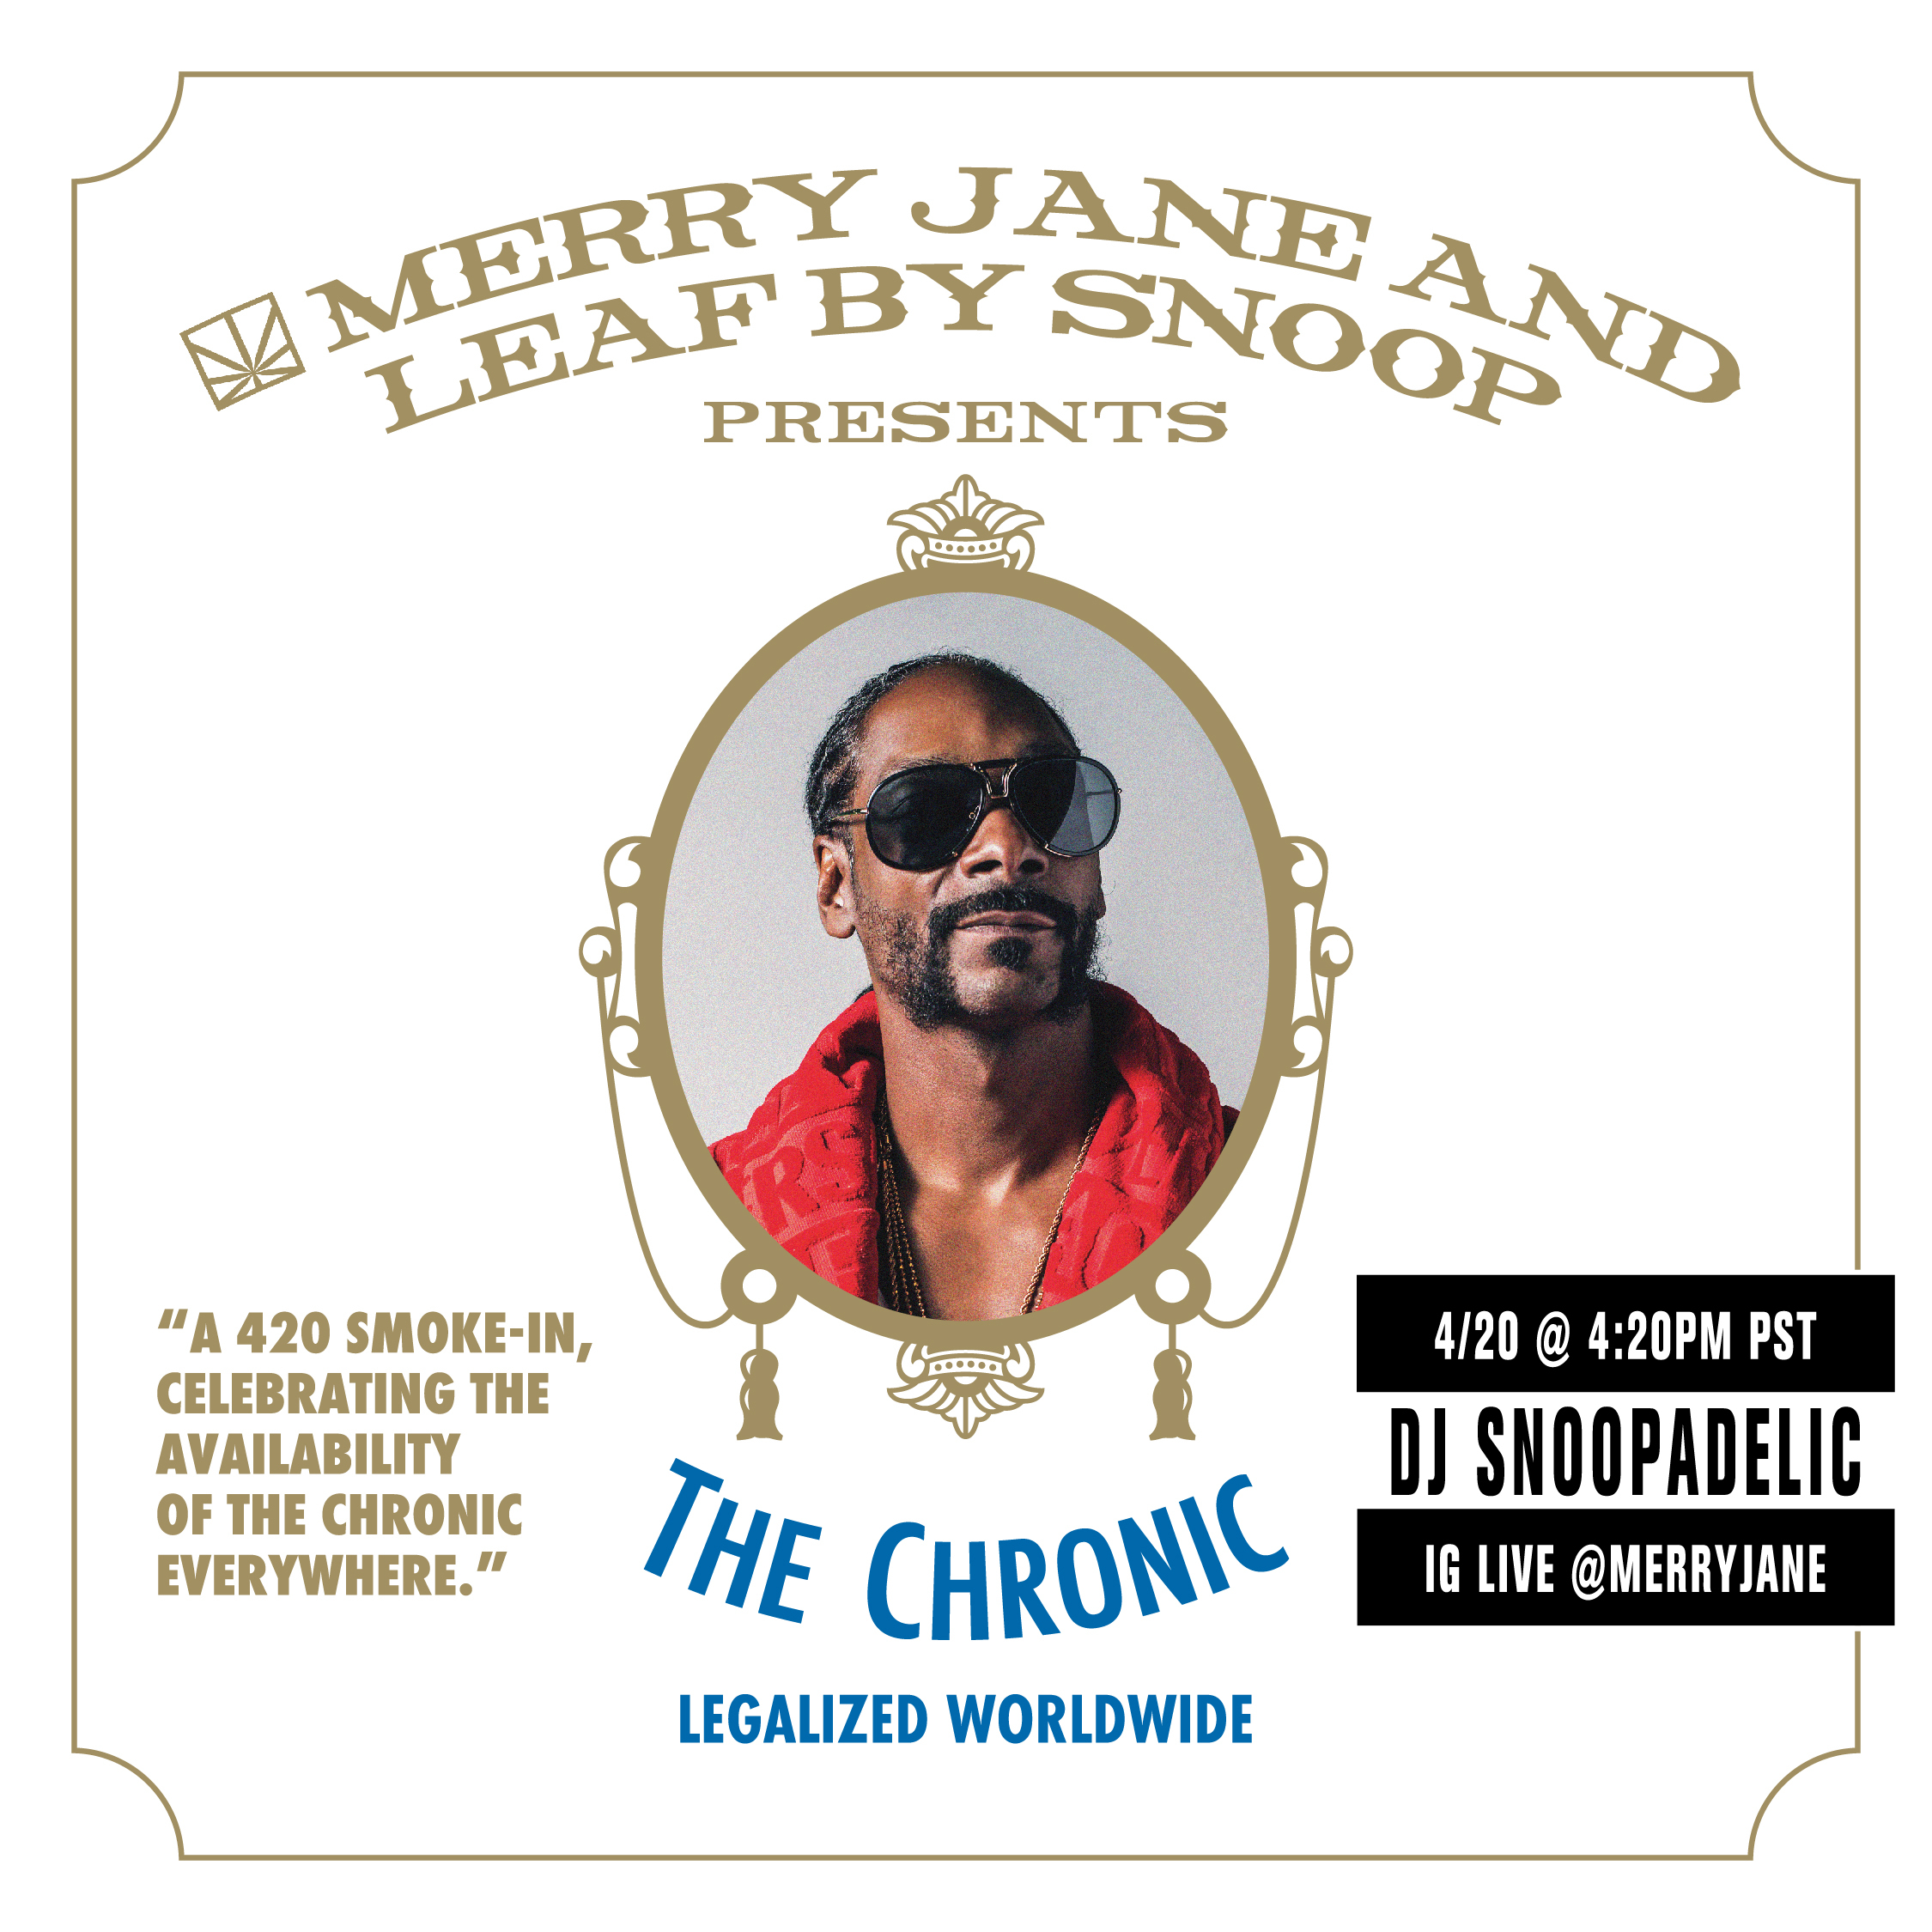 Snoop Dogg Will DJ a Special Livestream Set on 4/20 to Celebrate “The Chronic”